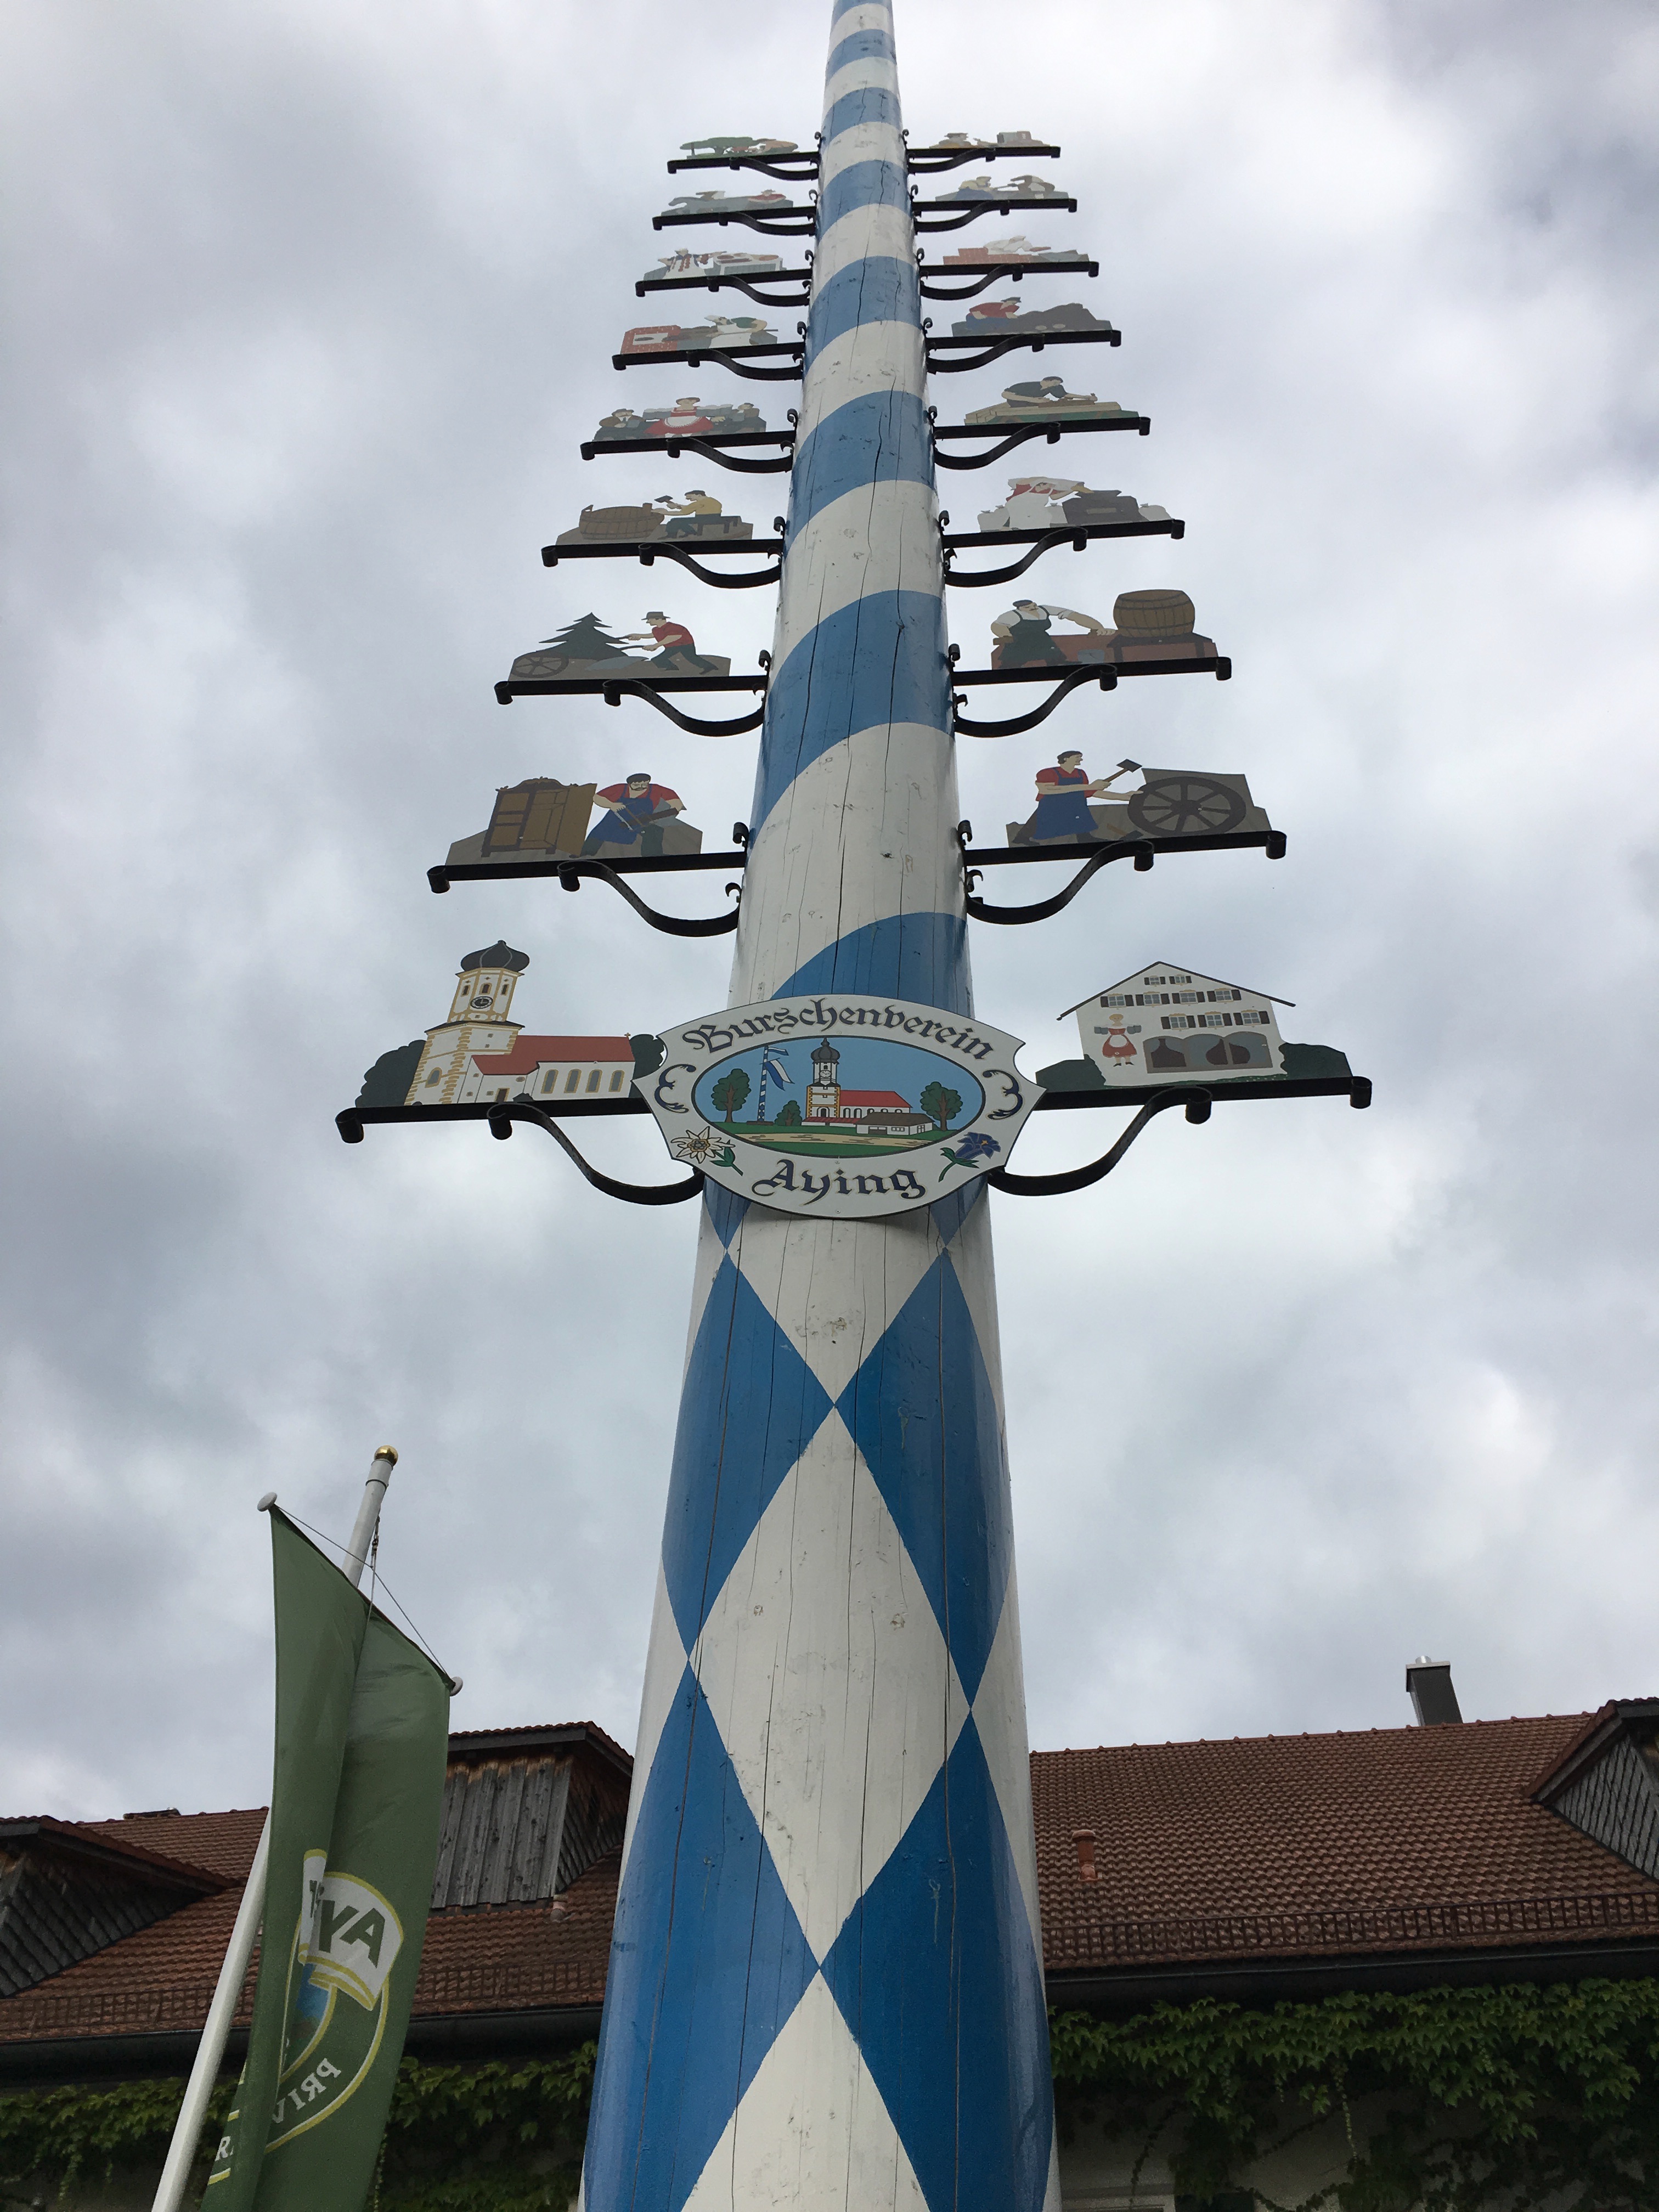 A maypole in front of Brauereigasthof Hotel Aying.